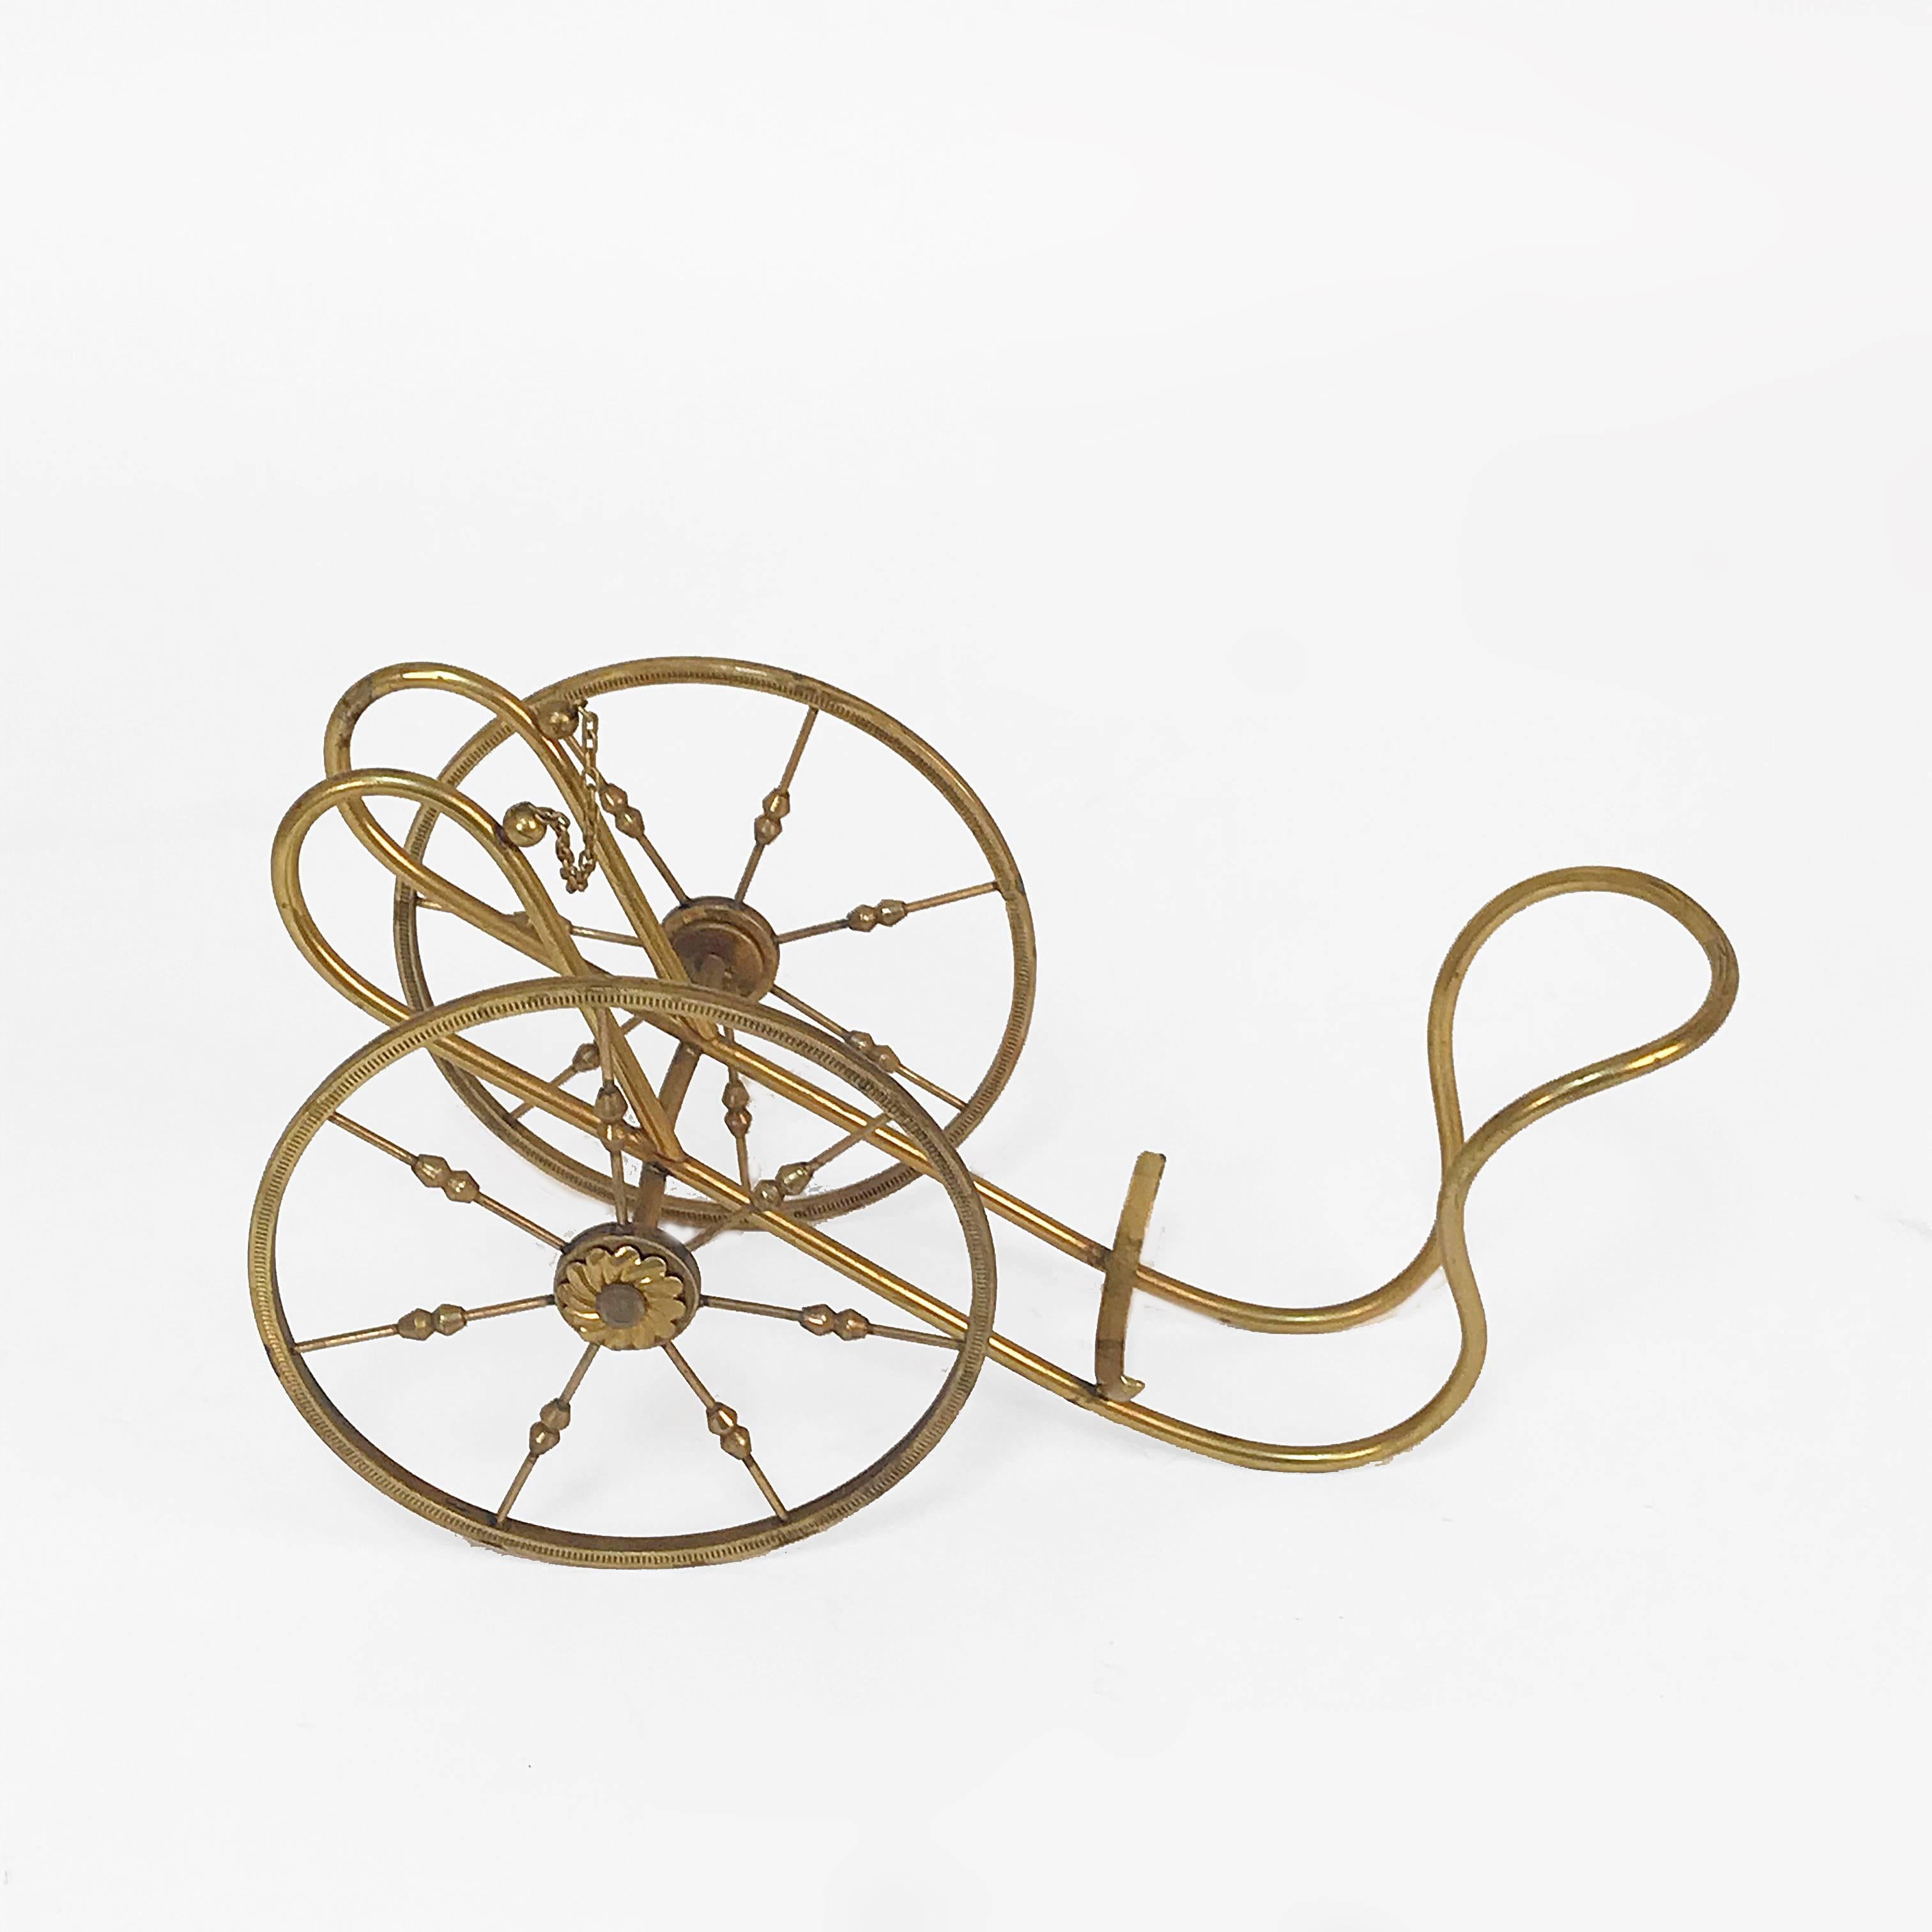 Bottle rack in gilded brass, Italy, 1950s by Aldo Tura.

This wine rack is very unique as the main structure is sustained by two neoclassical wheels, giving this classic piece a fun touch.

Perfect for a classic or neoclassic dining room.